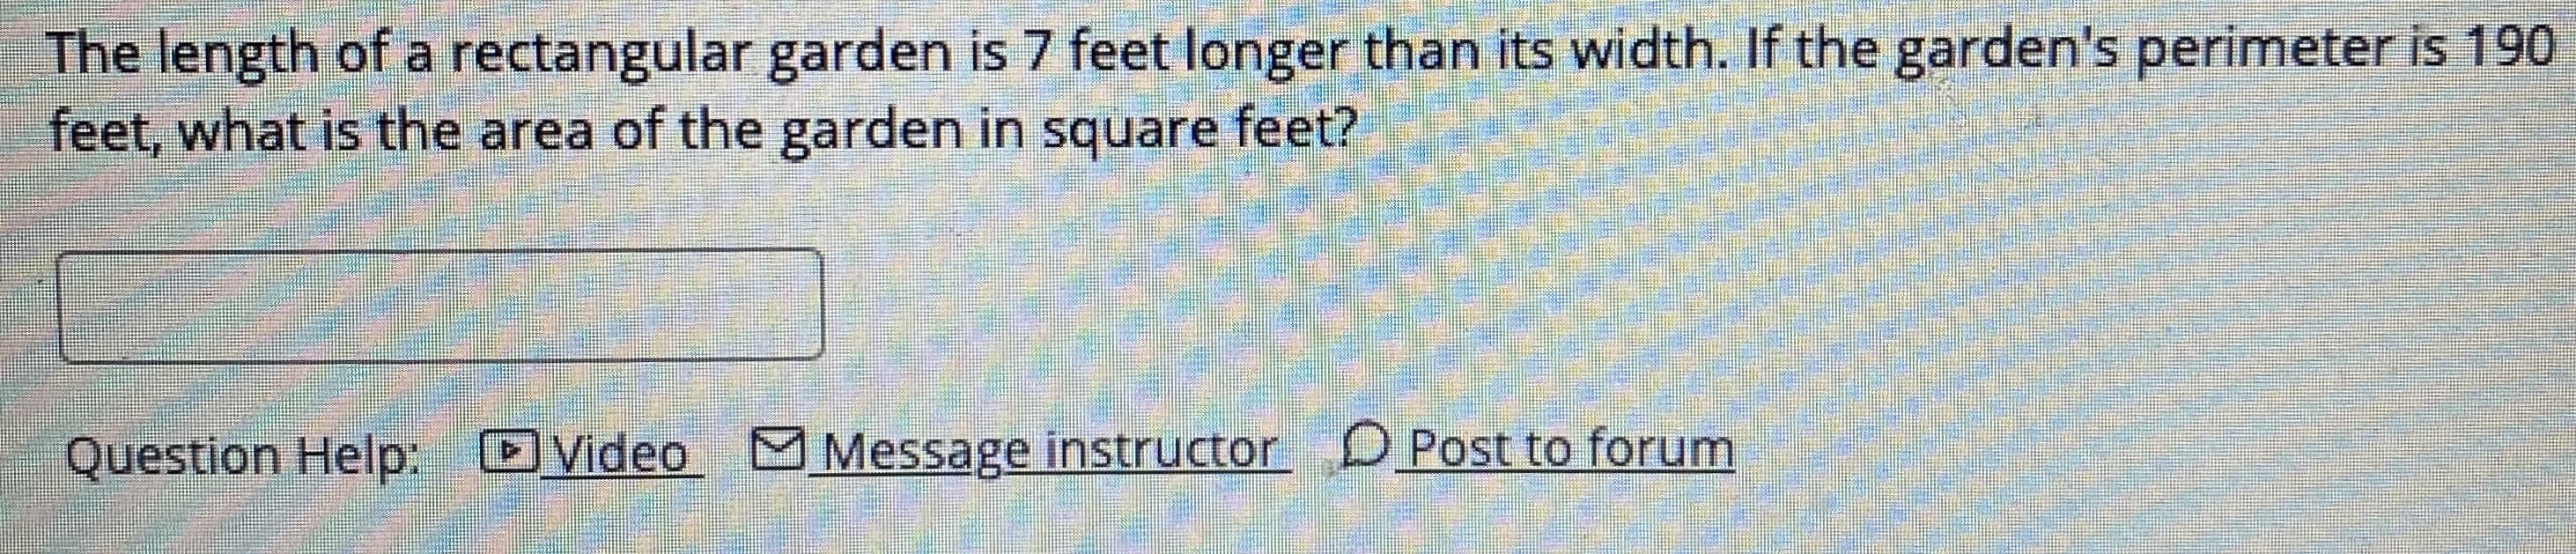 The length of a rectangular garden is 7 feet longer than its width. If the garden's perimeter is 190
feet, what is the area of the garden in square feet?
Question Help:
Video M Message instructor D Post to forum
